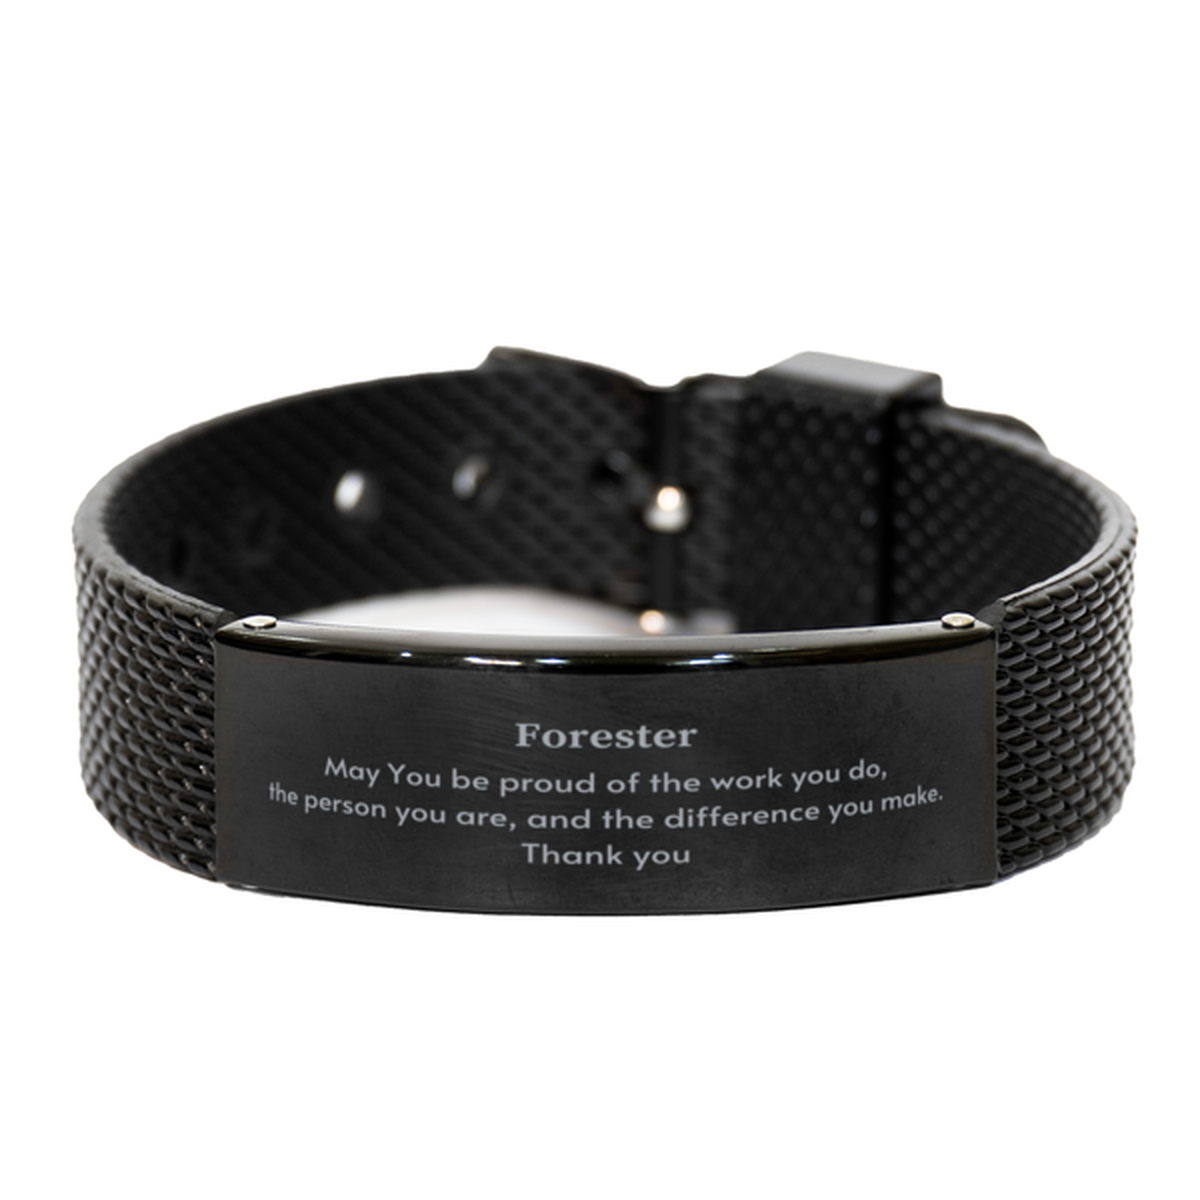 Heartwarming Black Shark Mesh Bracelet Retirement Coworkers Gifts for Forester, Forester May You be proud of the work you do, the person you are Gifts for Boss Men Women Friends